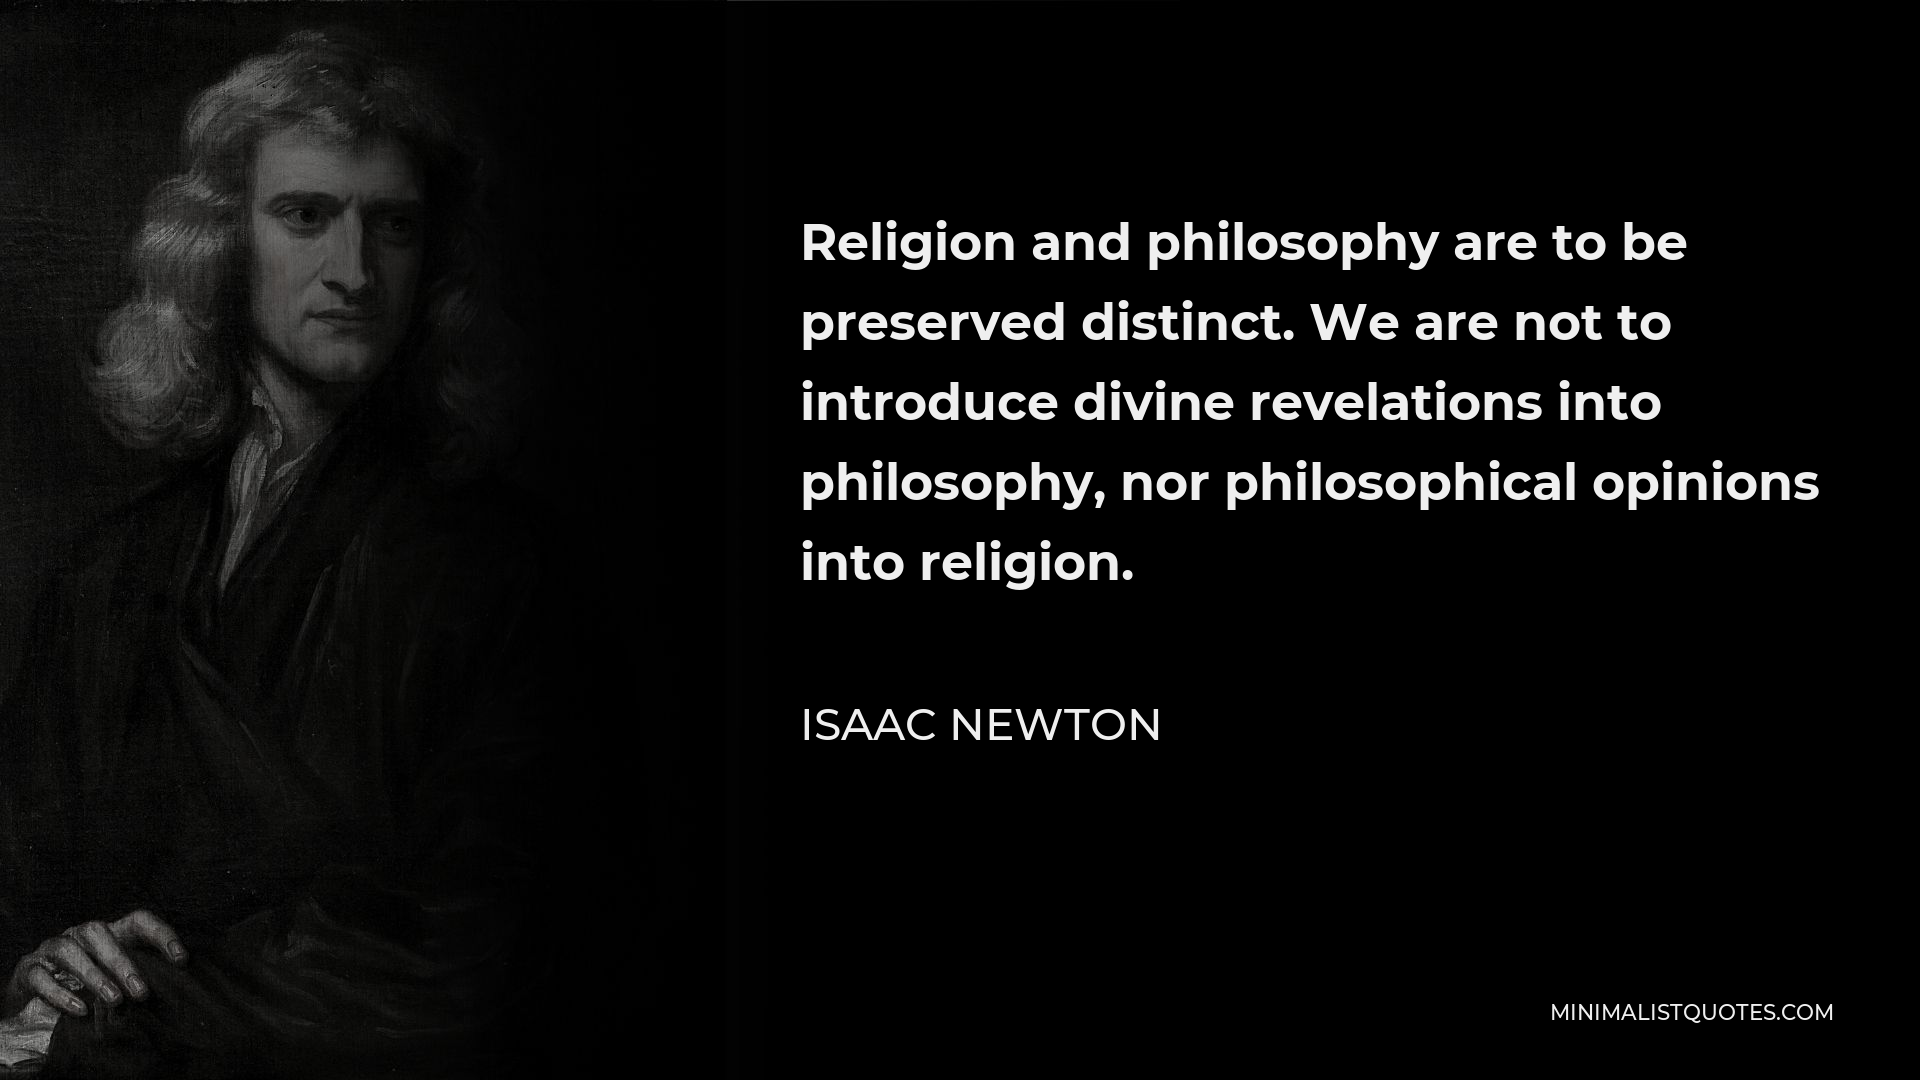 Isaac Newton Quote Religion And Philosophy Are To Be Preserved Distinct We Are Not To 9922